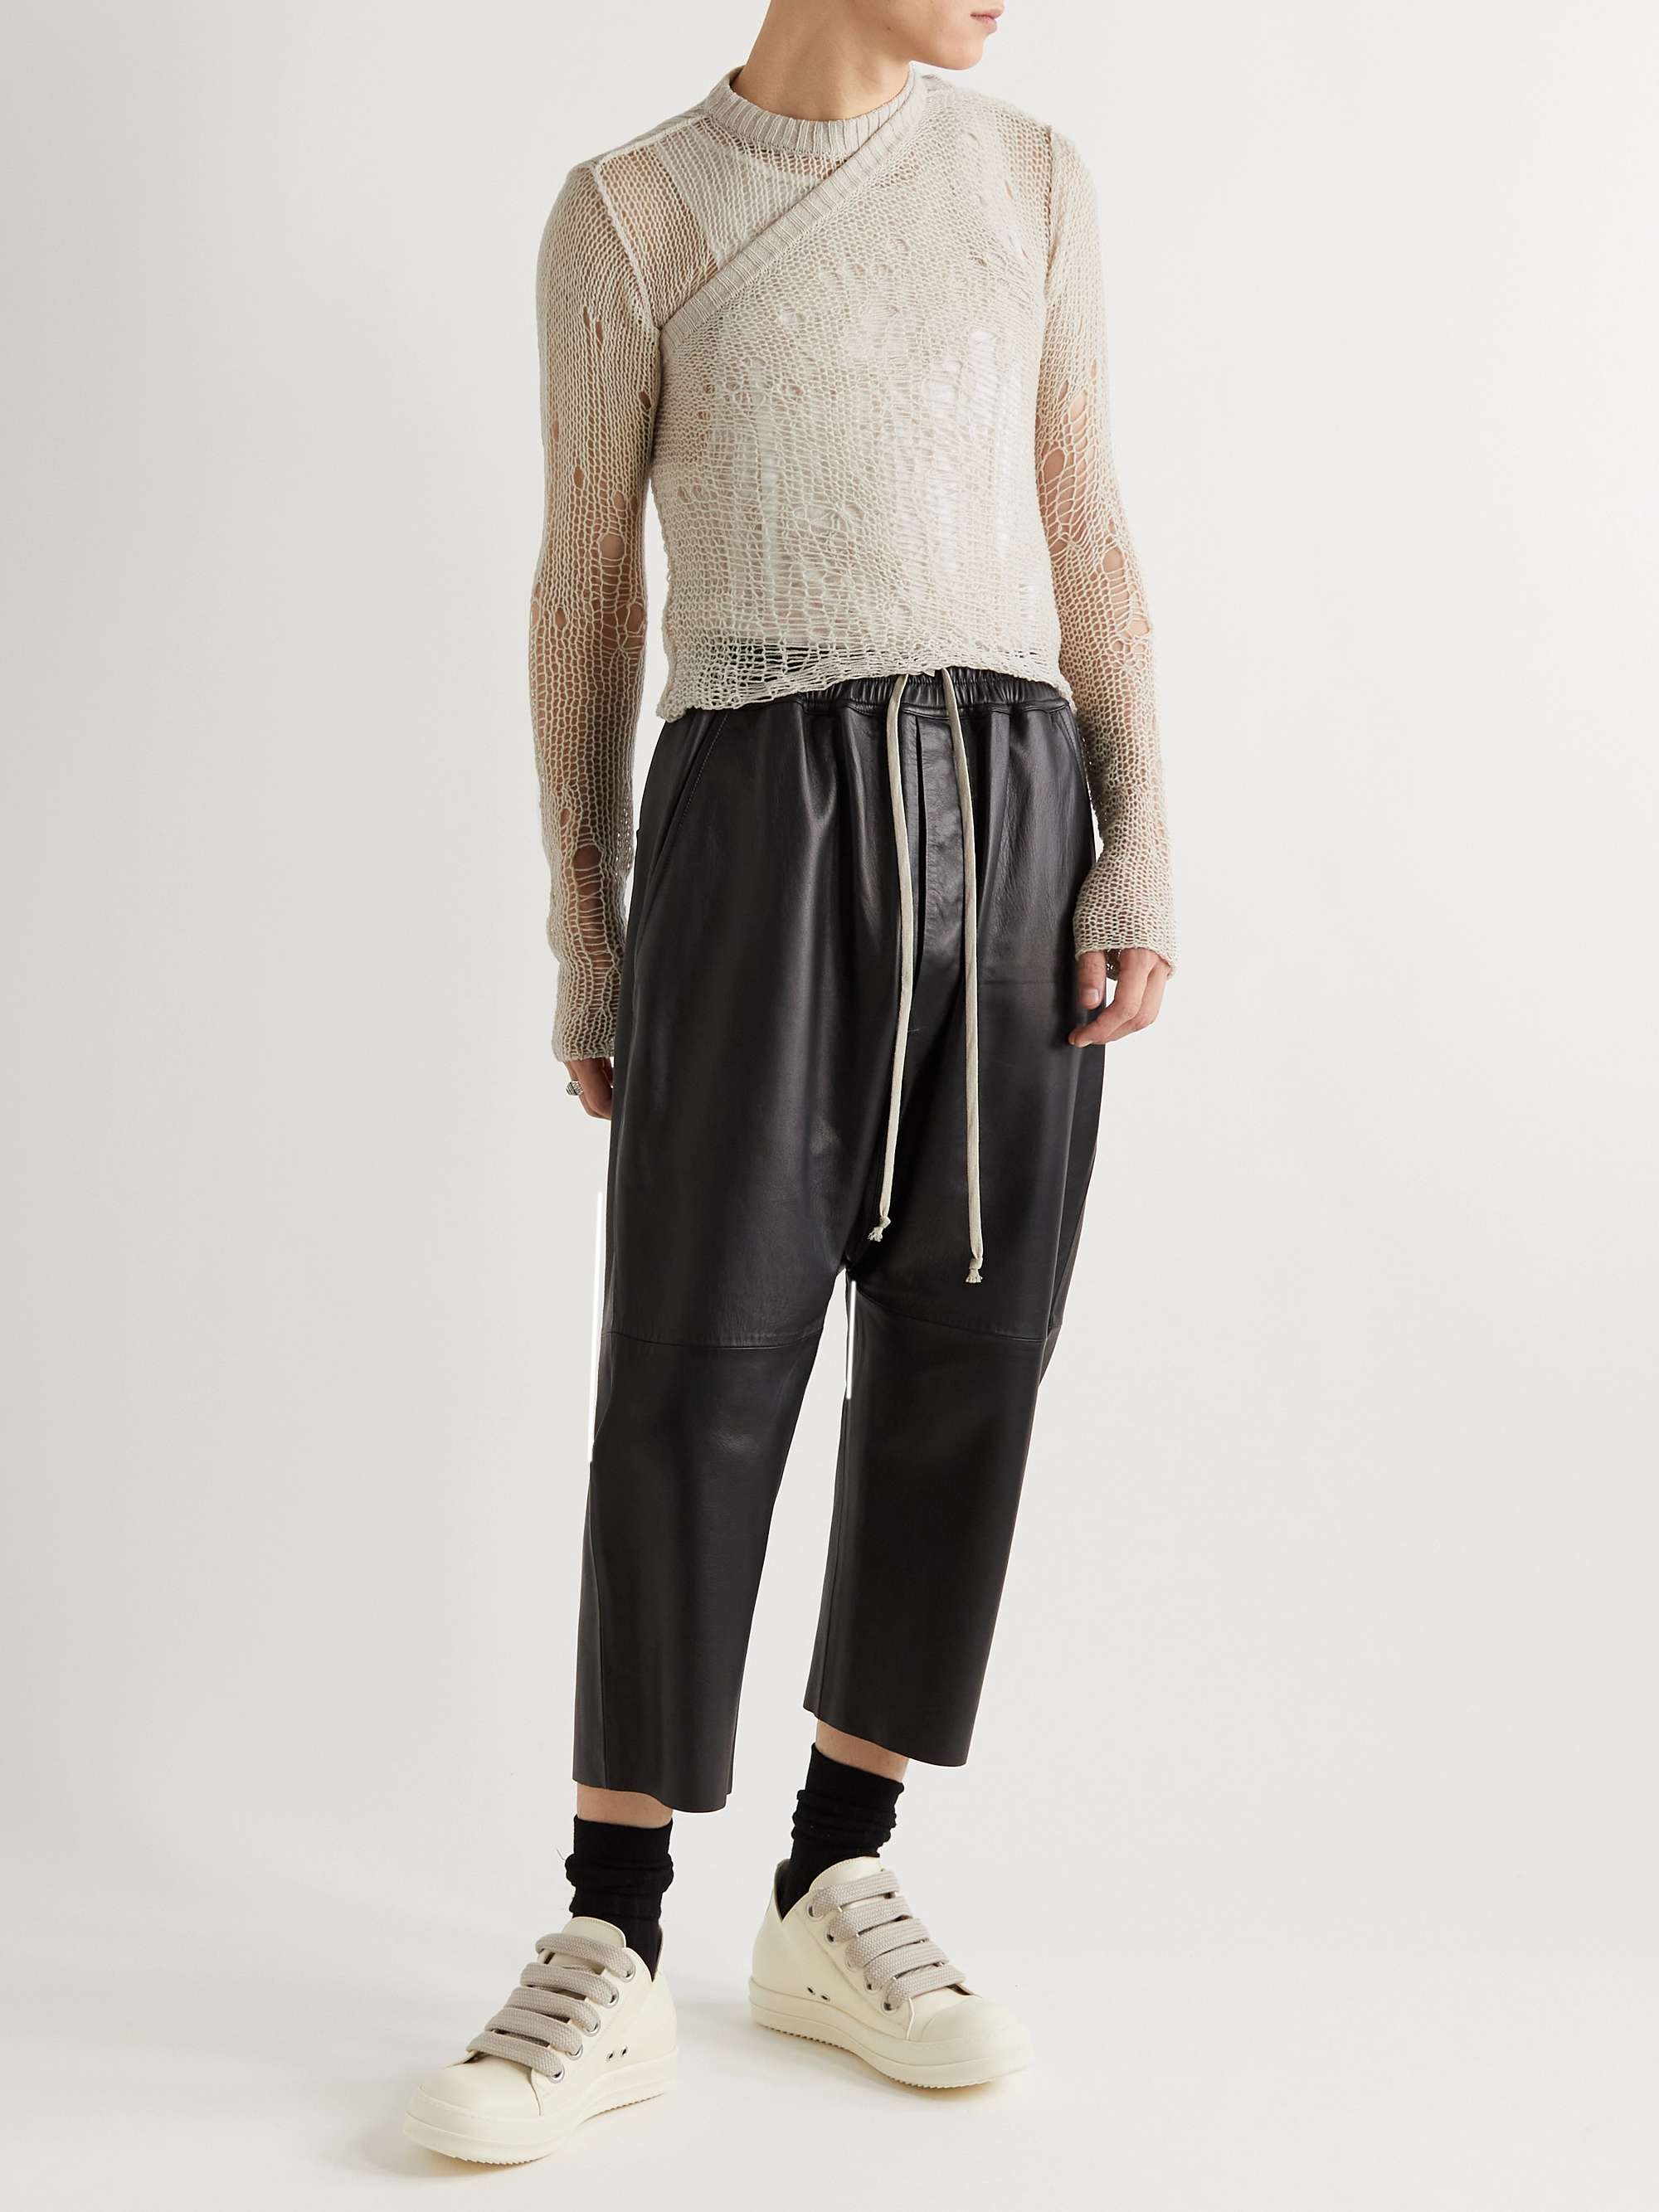 RICK OWENS Distressed Open-Knit Cashmere and Wool-Blend Sweater